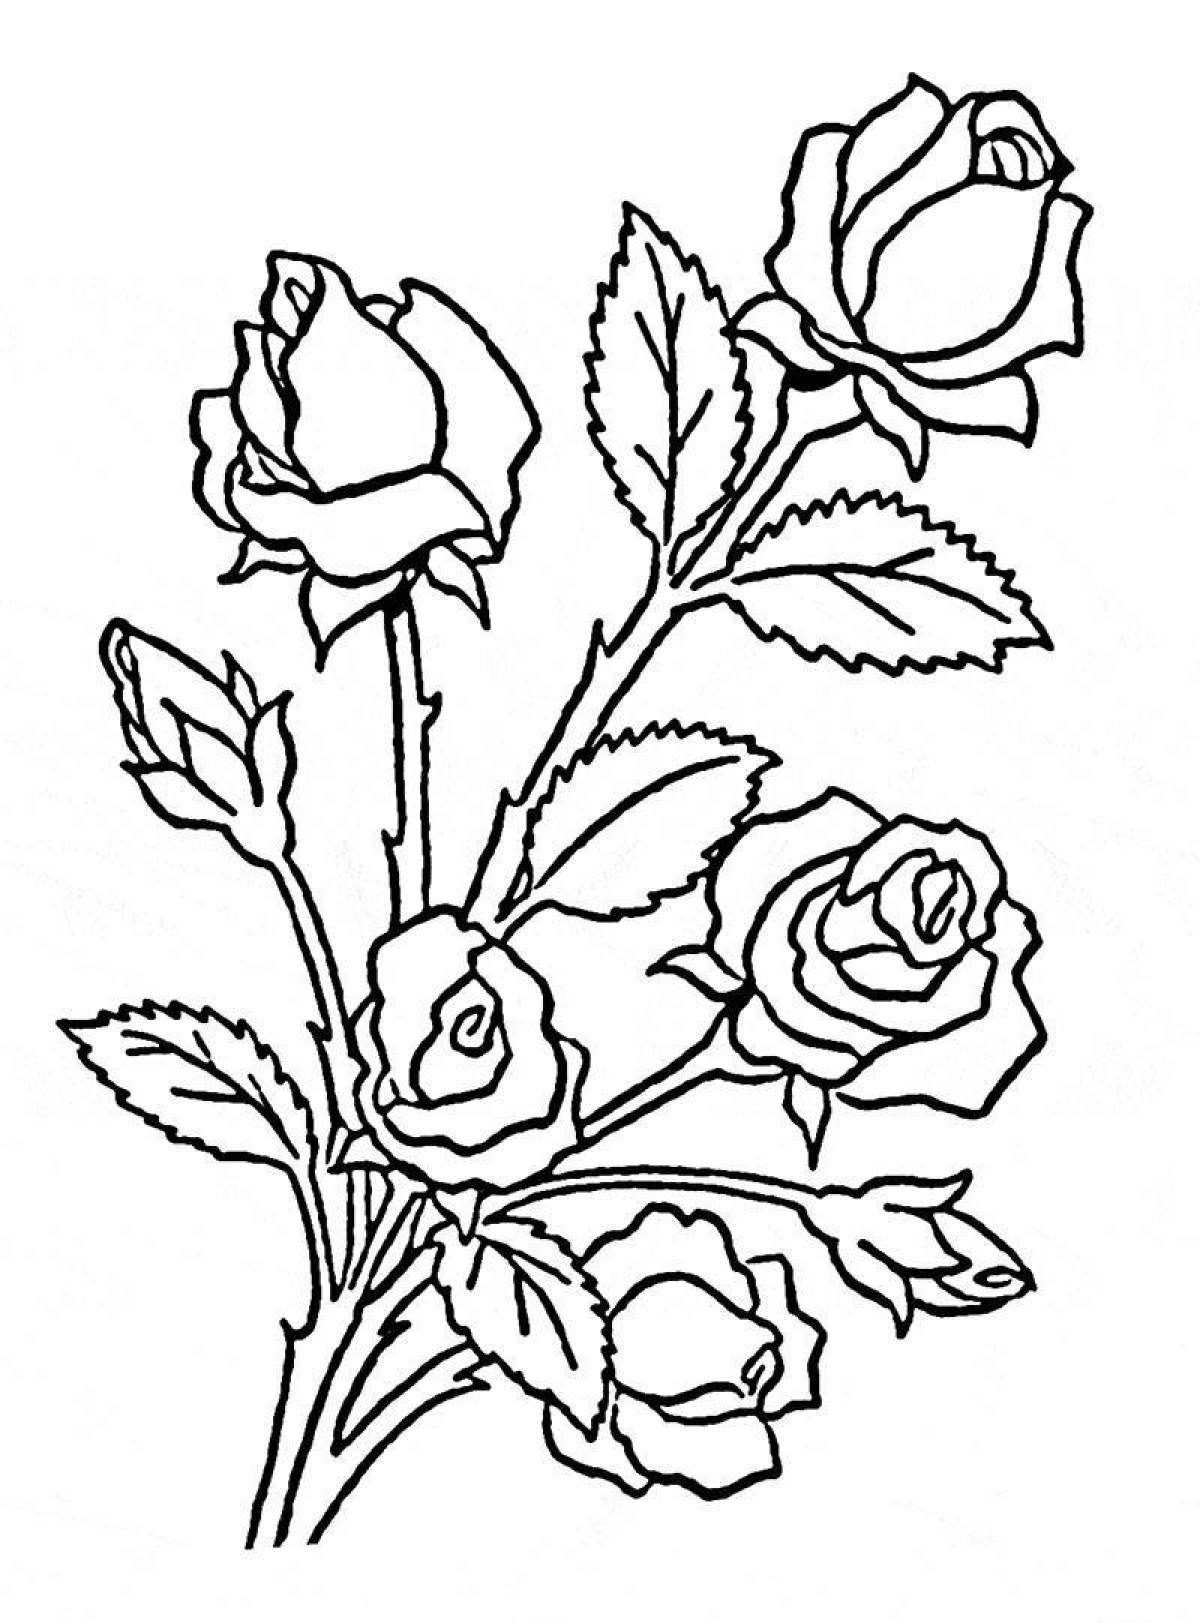 Adorable rose coloring book for kids